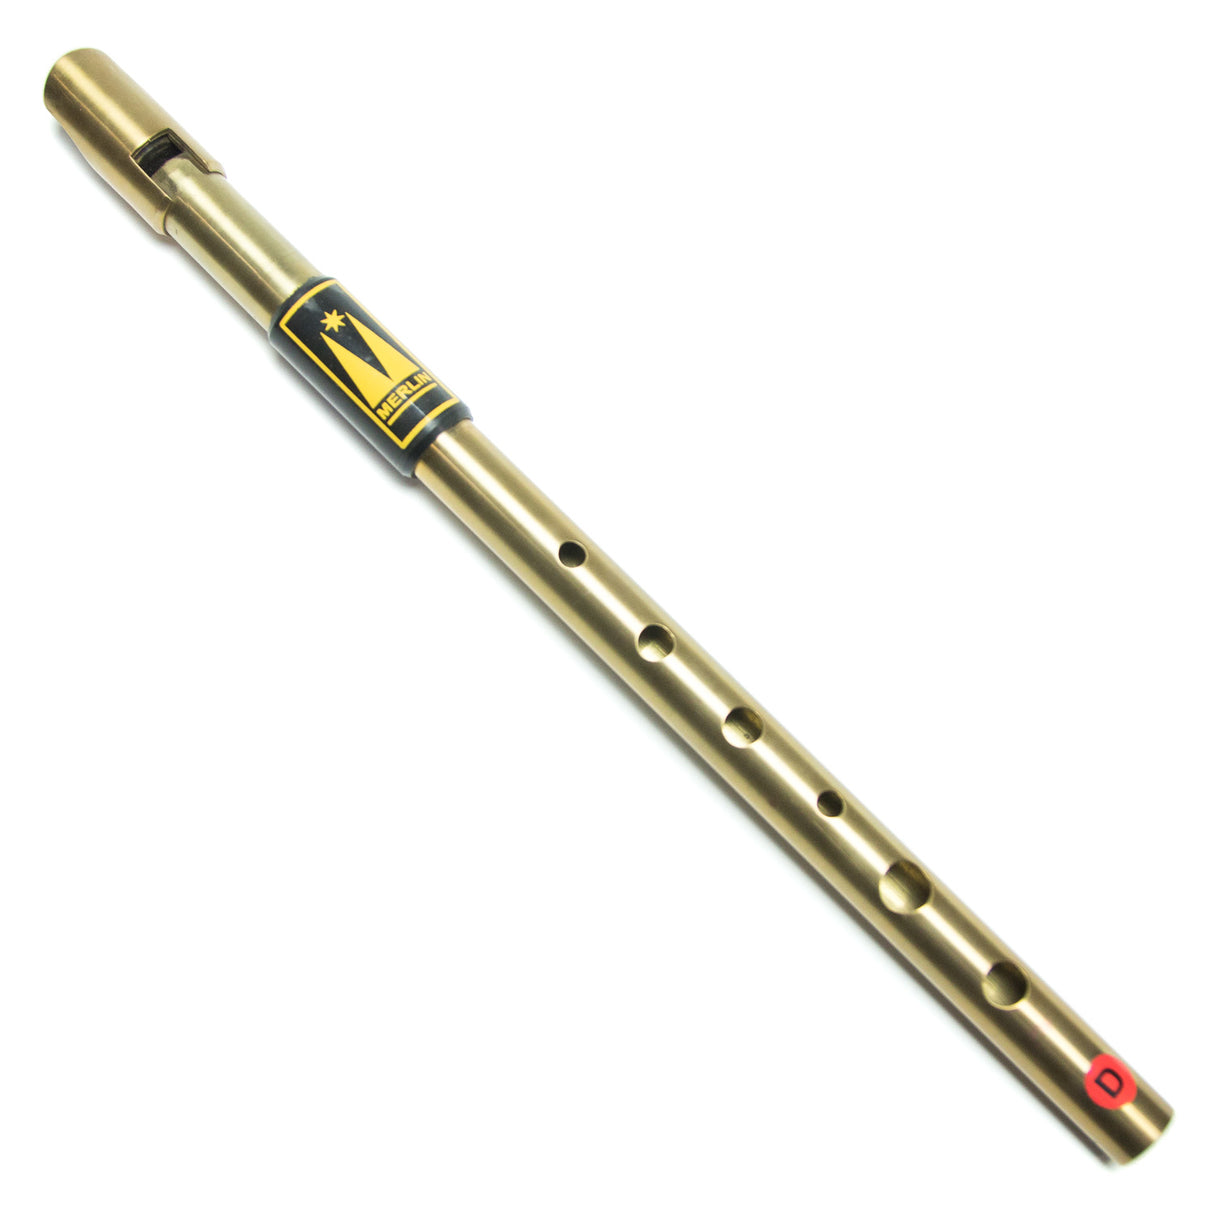 Merlin Excalibur "Gold" (Brass) Narrow Bore D Whistle